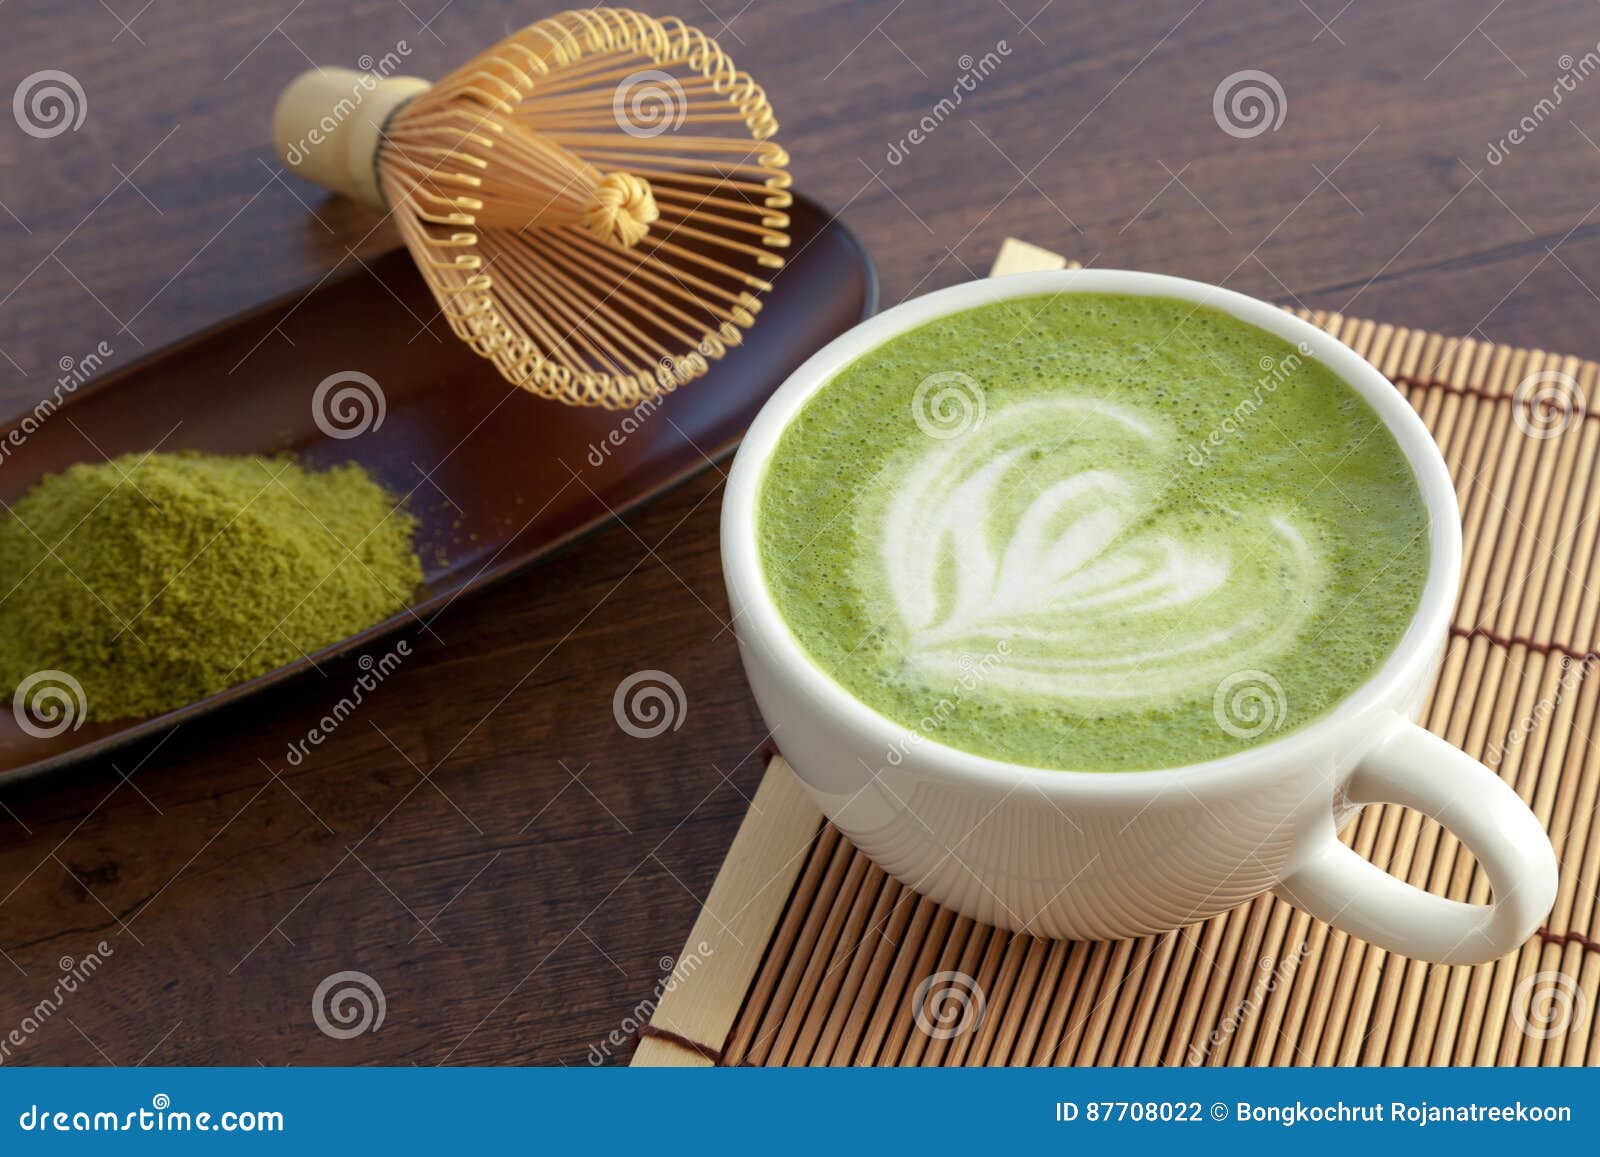 matcha latte art heart  on top on wooden table with some gr